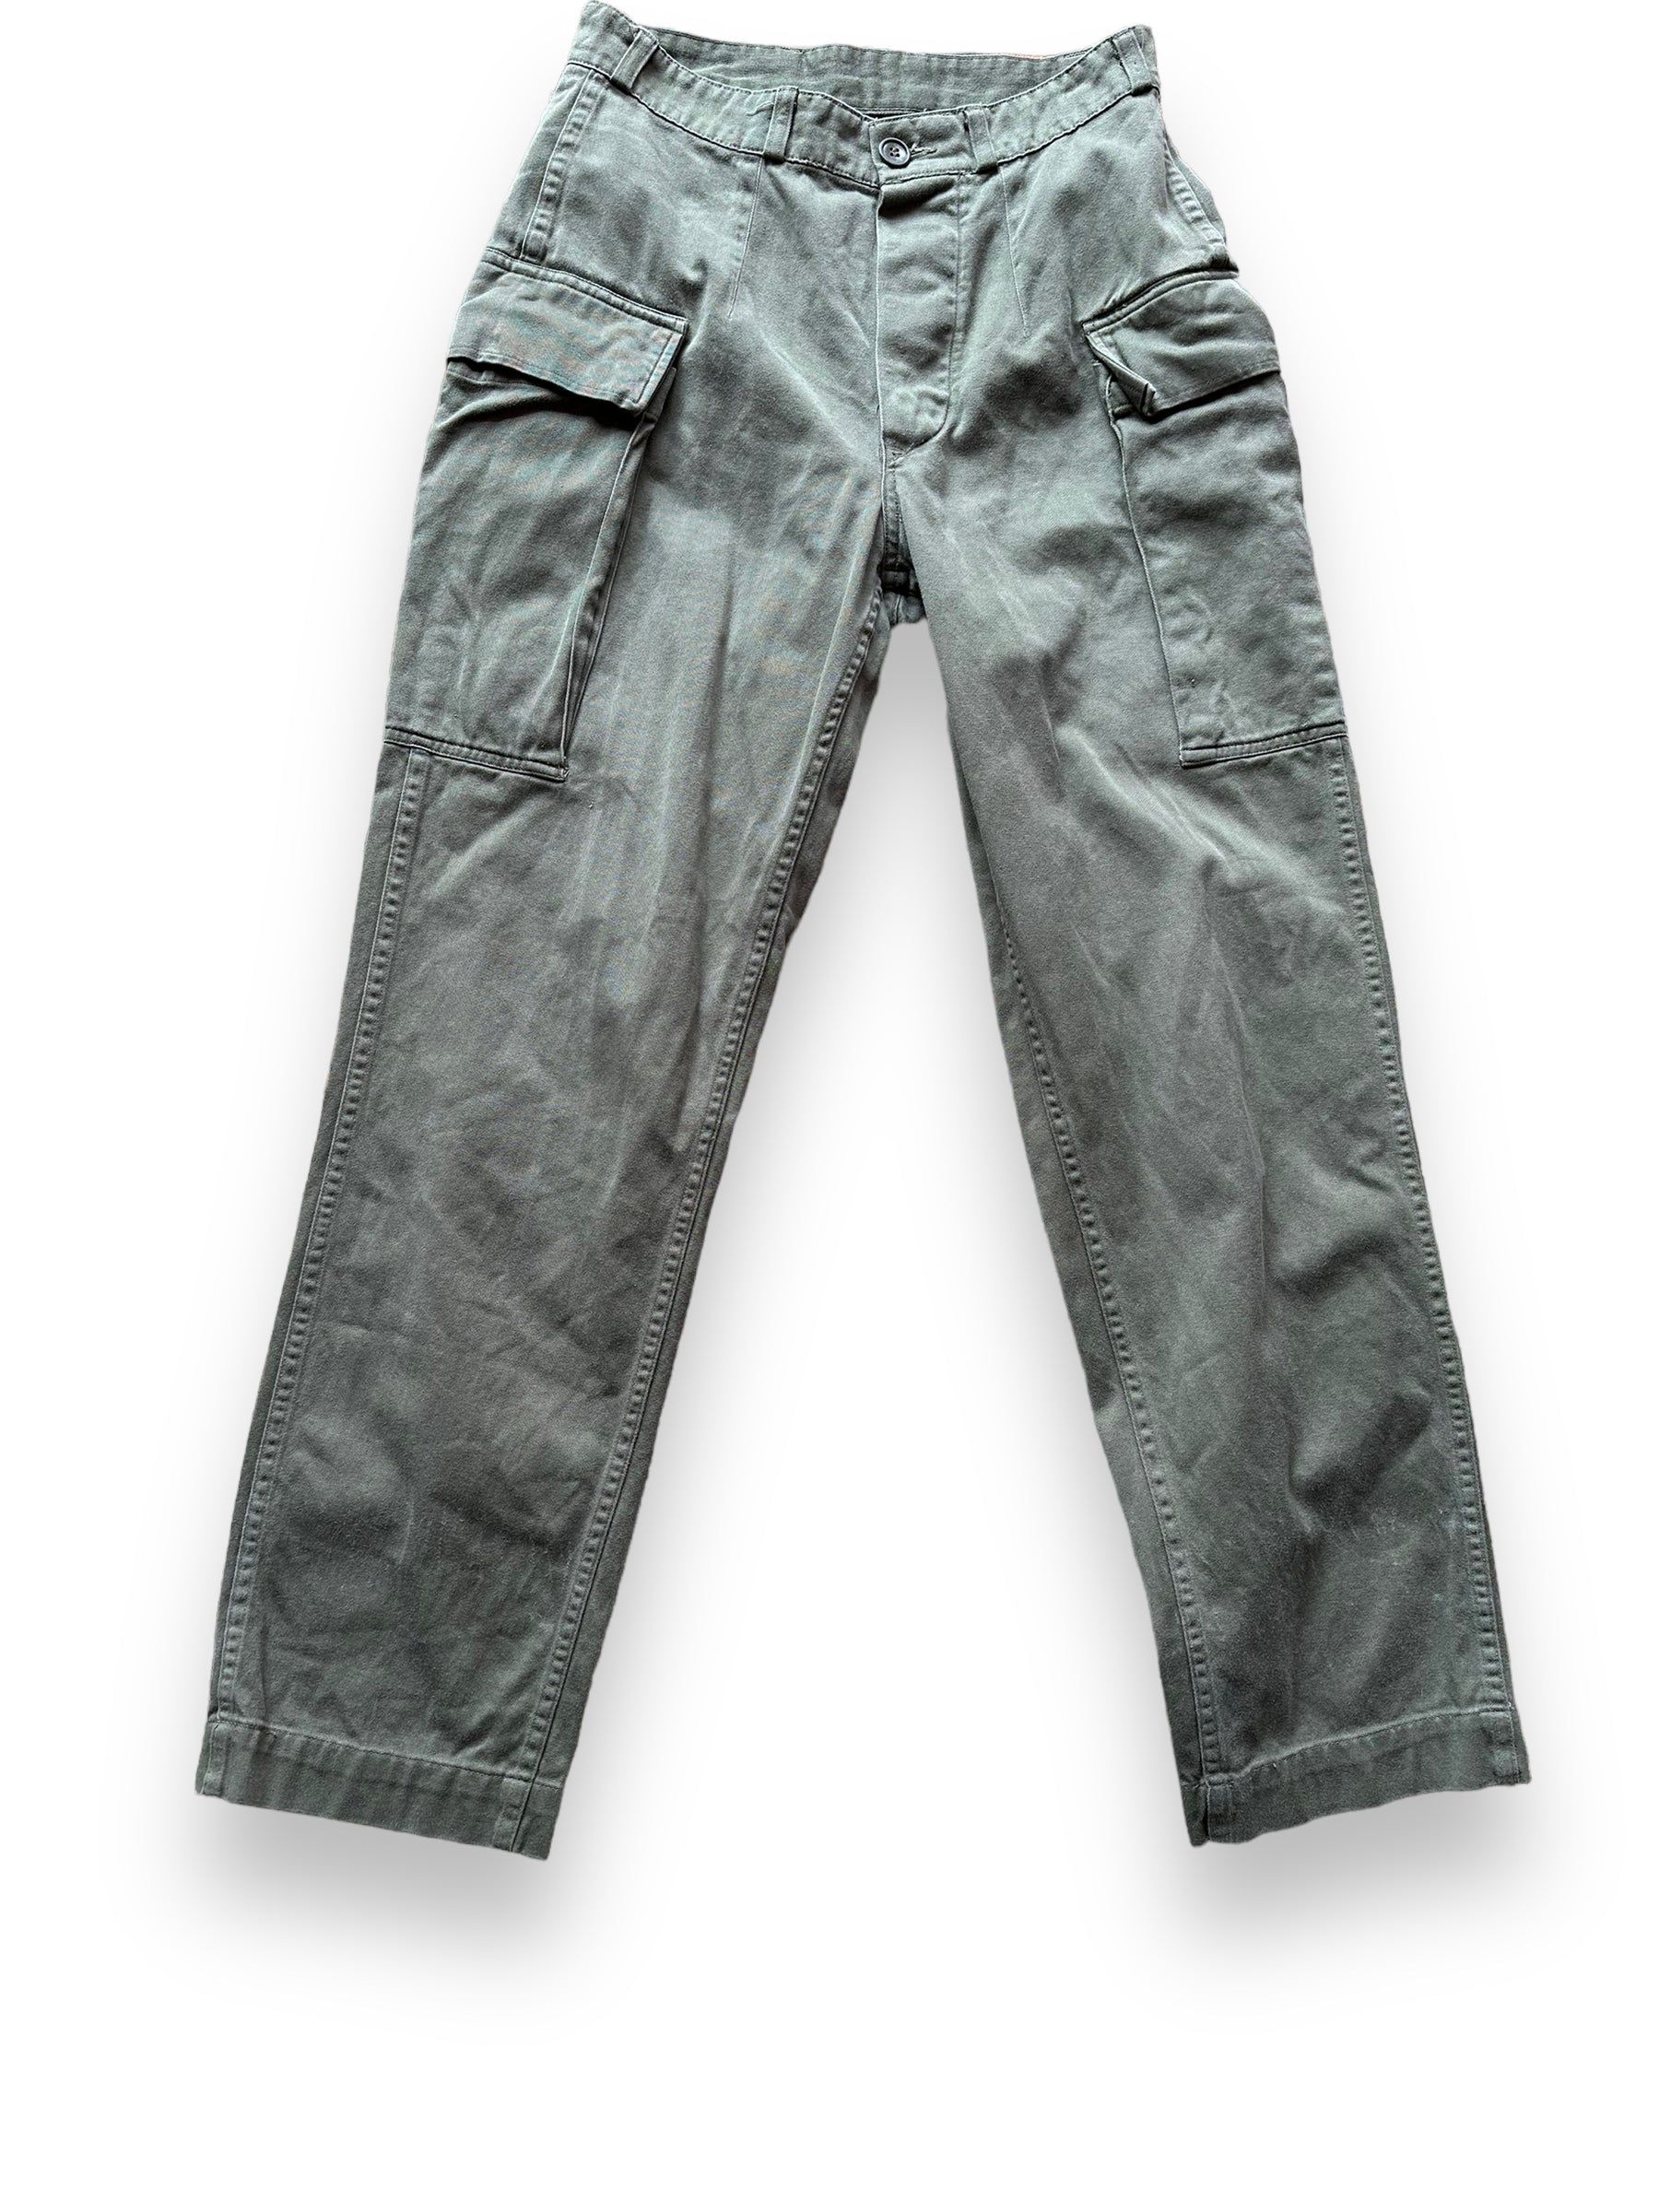 Front View of Vintage European Workwear Cotton Trousers Olive Drab W28 | Barn Owl Vintage Seattle | Vintage Workwear Trousers Seattle